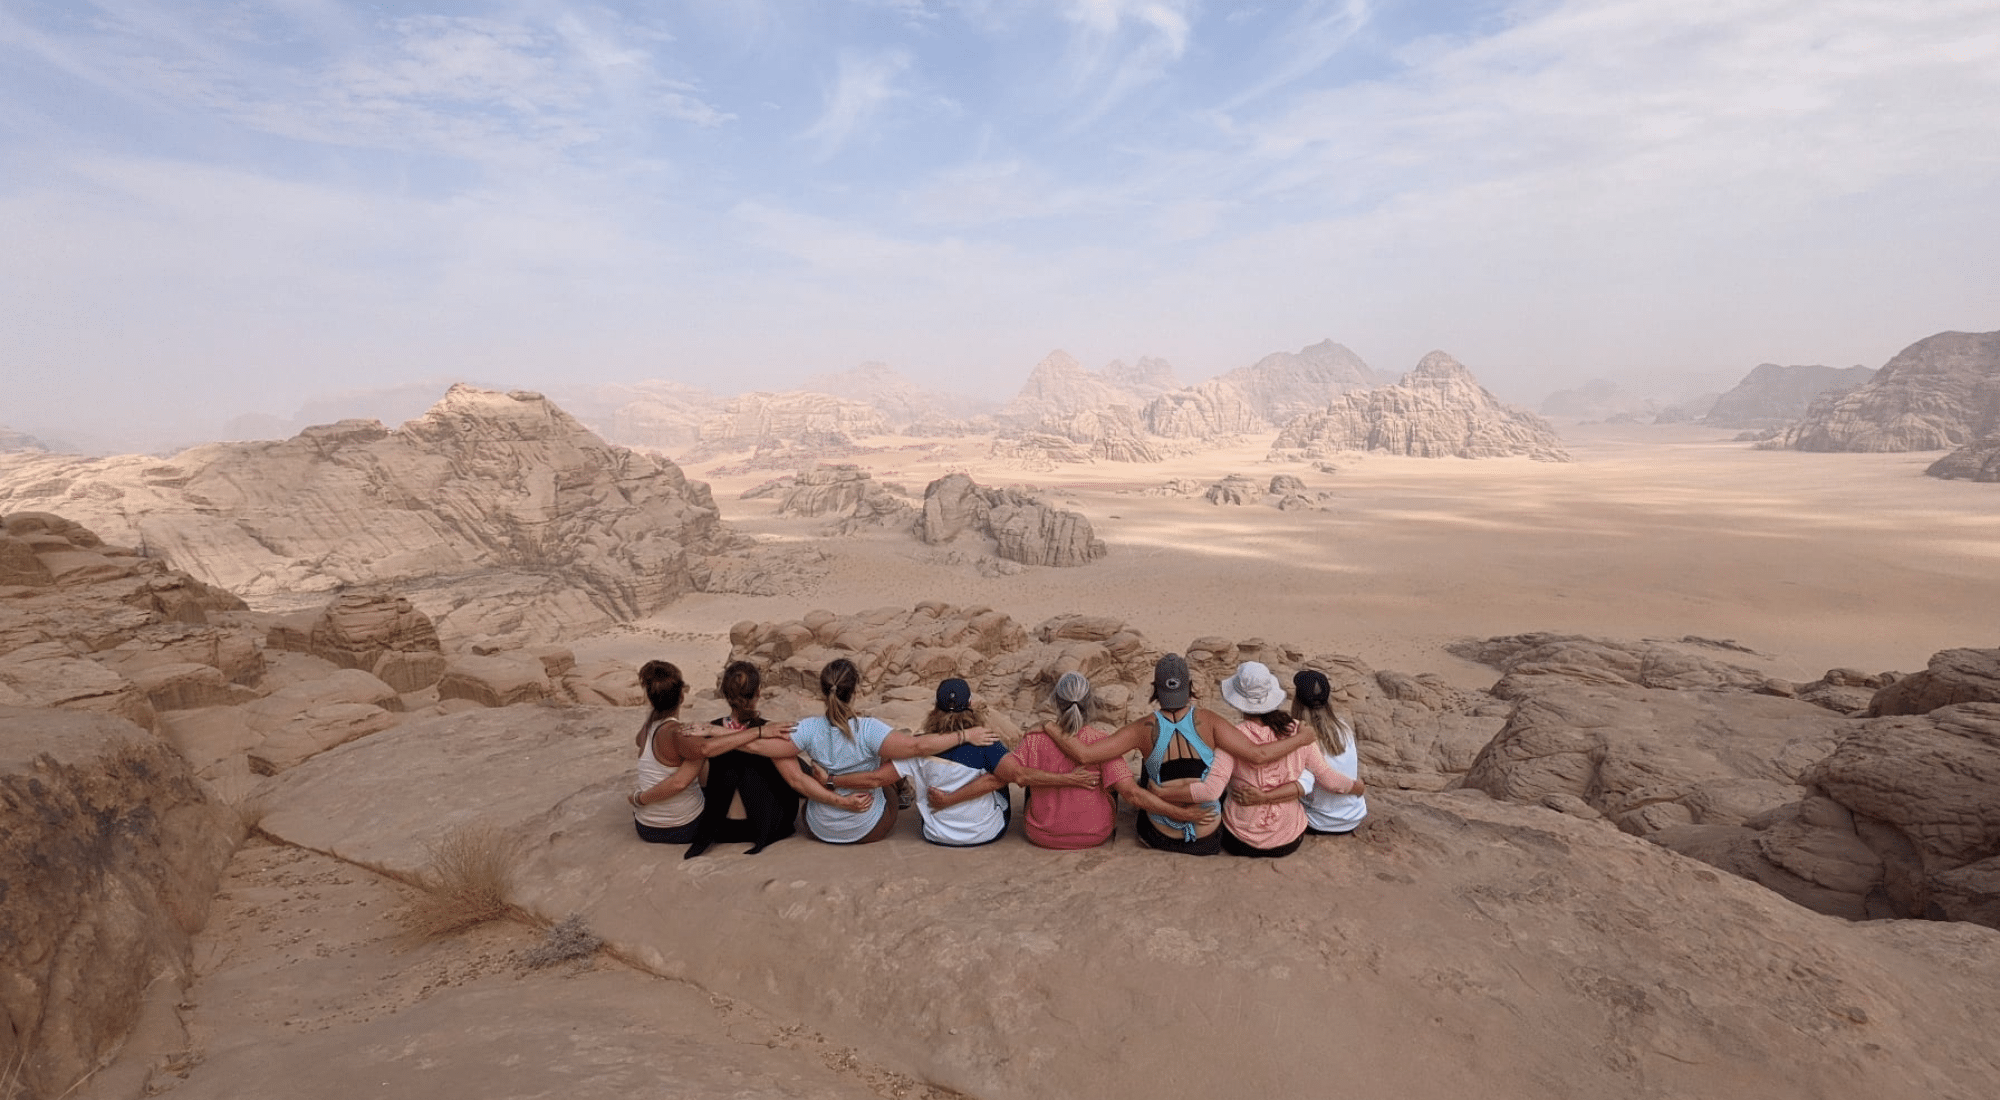 How (And Where) To Have An Ethical Camel Riding Adventure - Explorer Chick